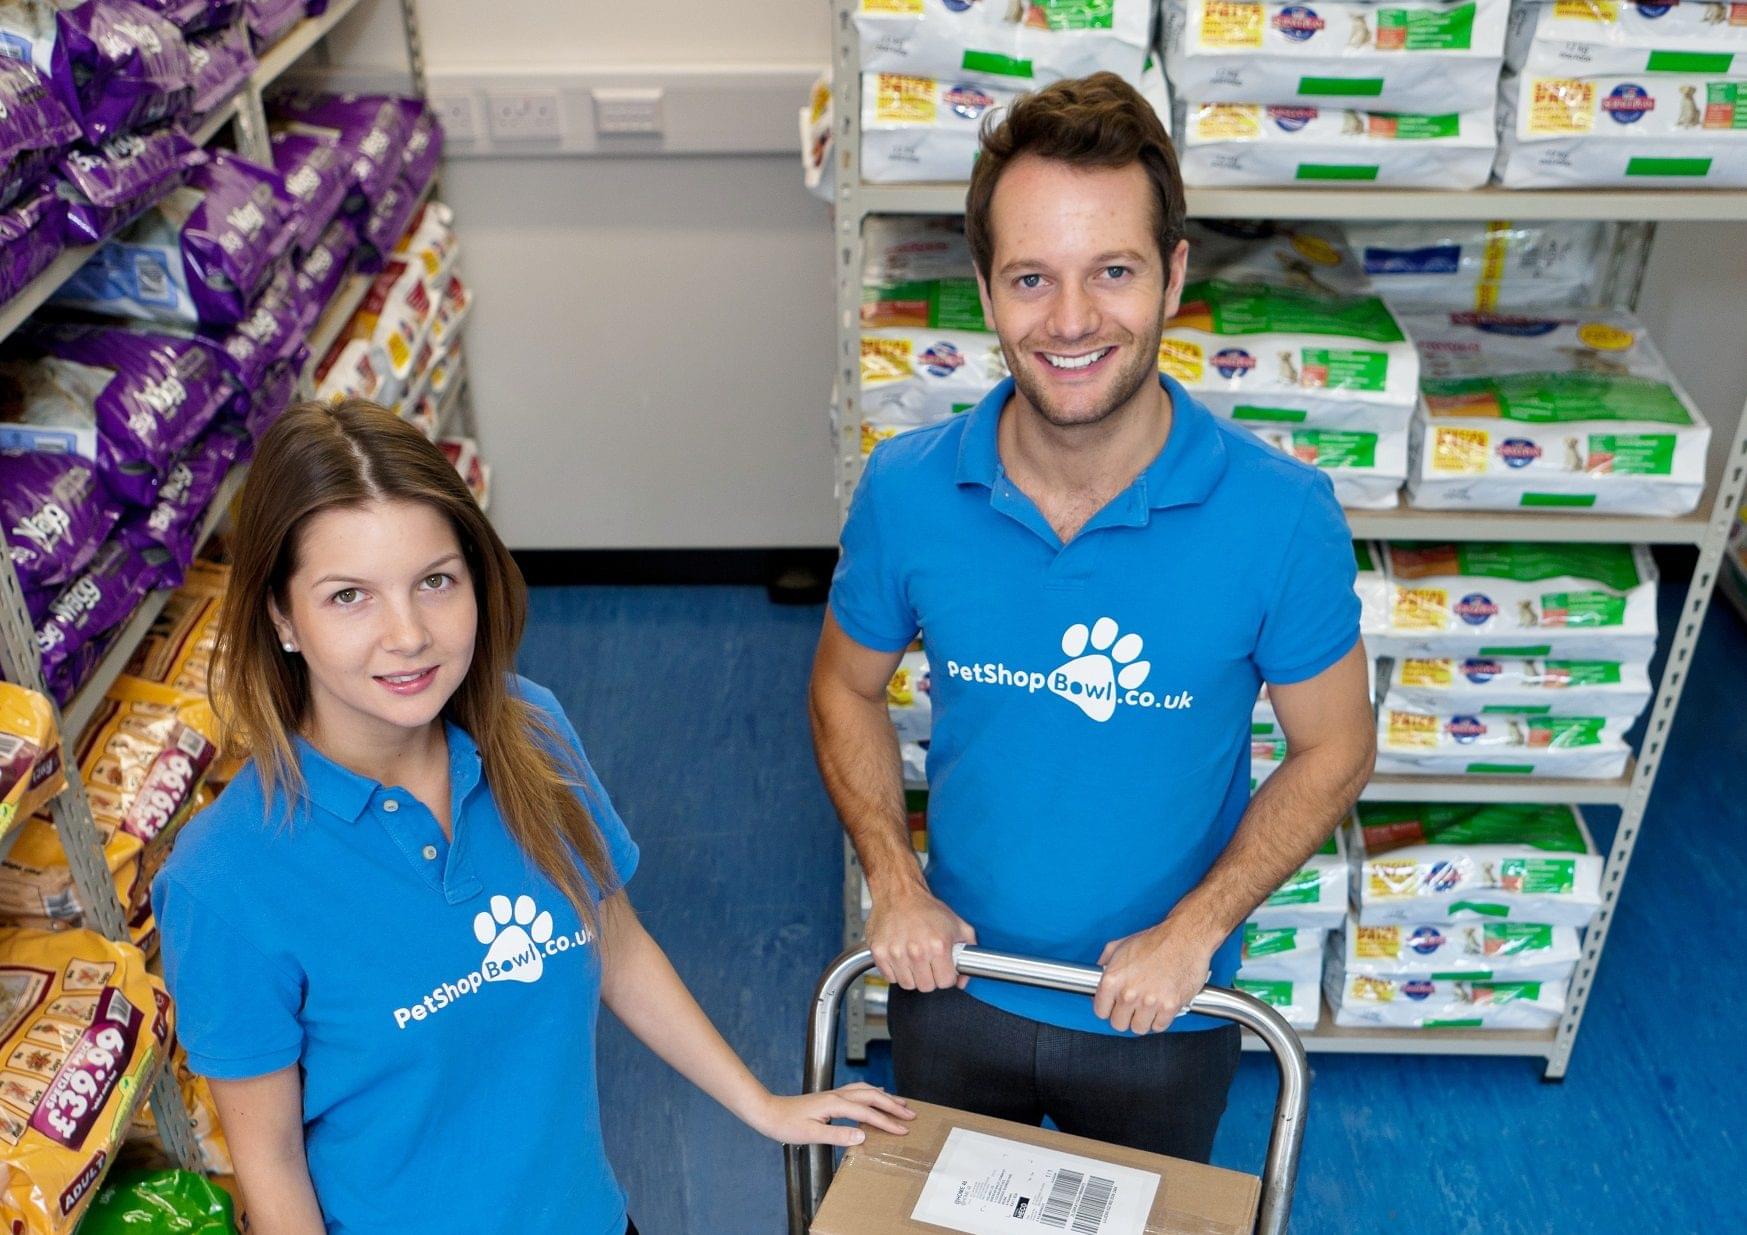 Adam and Lexi, the founders of PetShop.co.uk